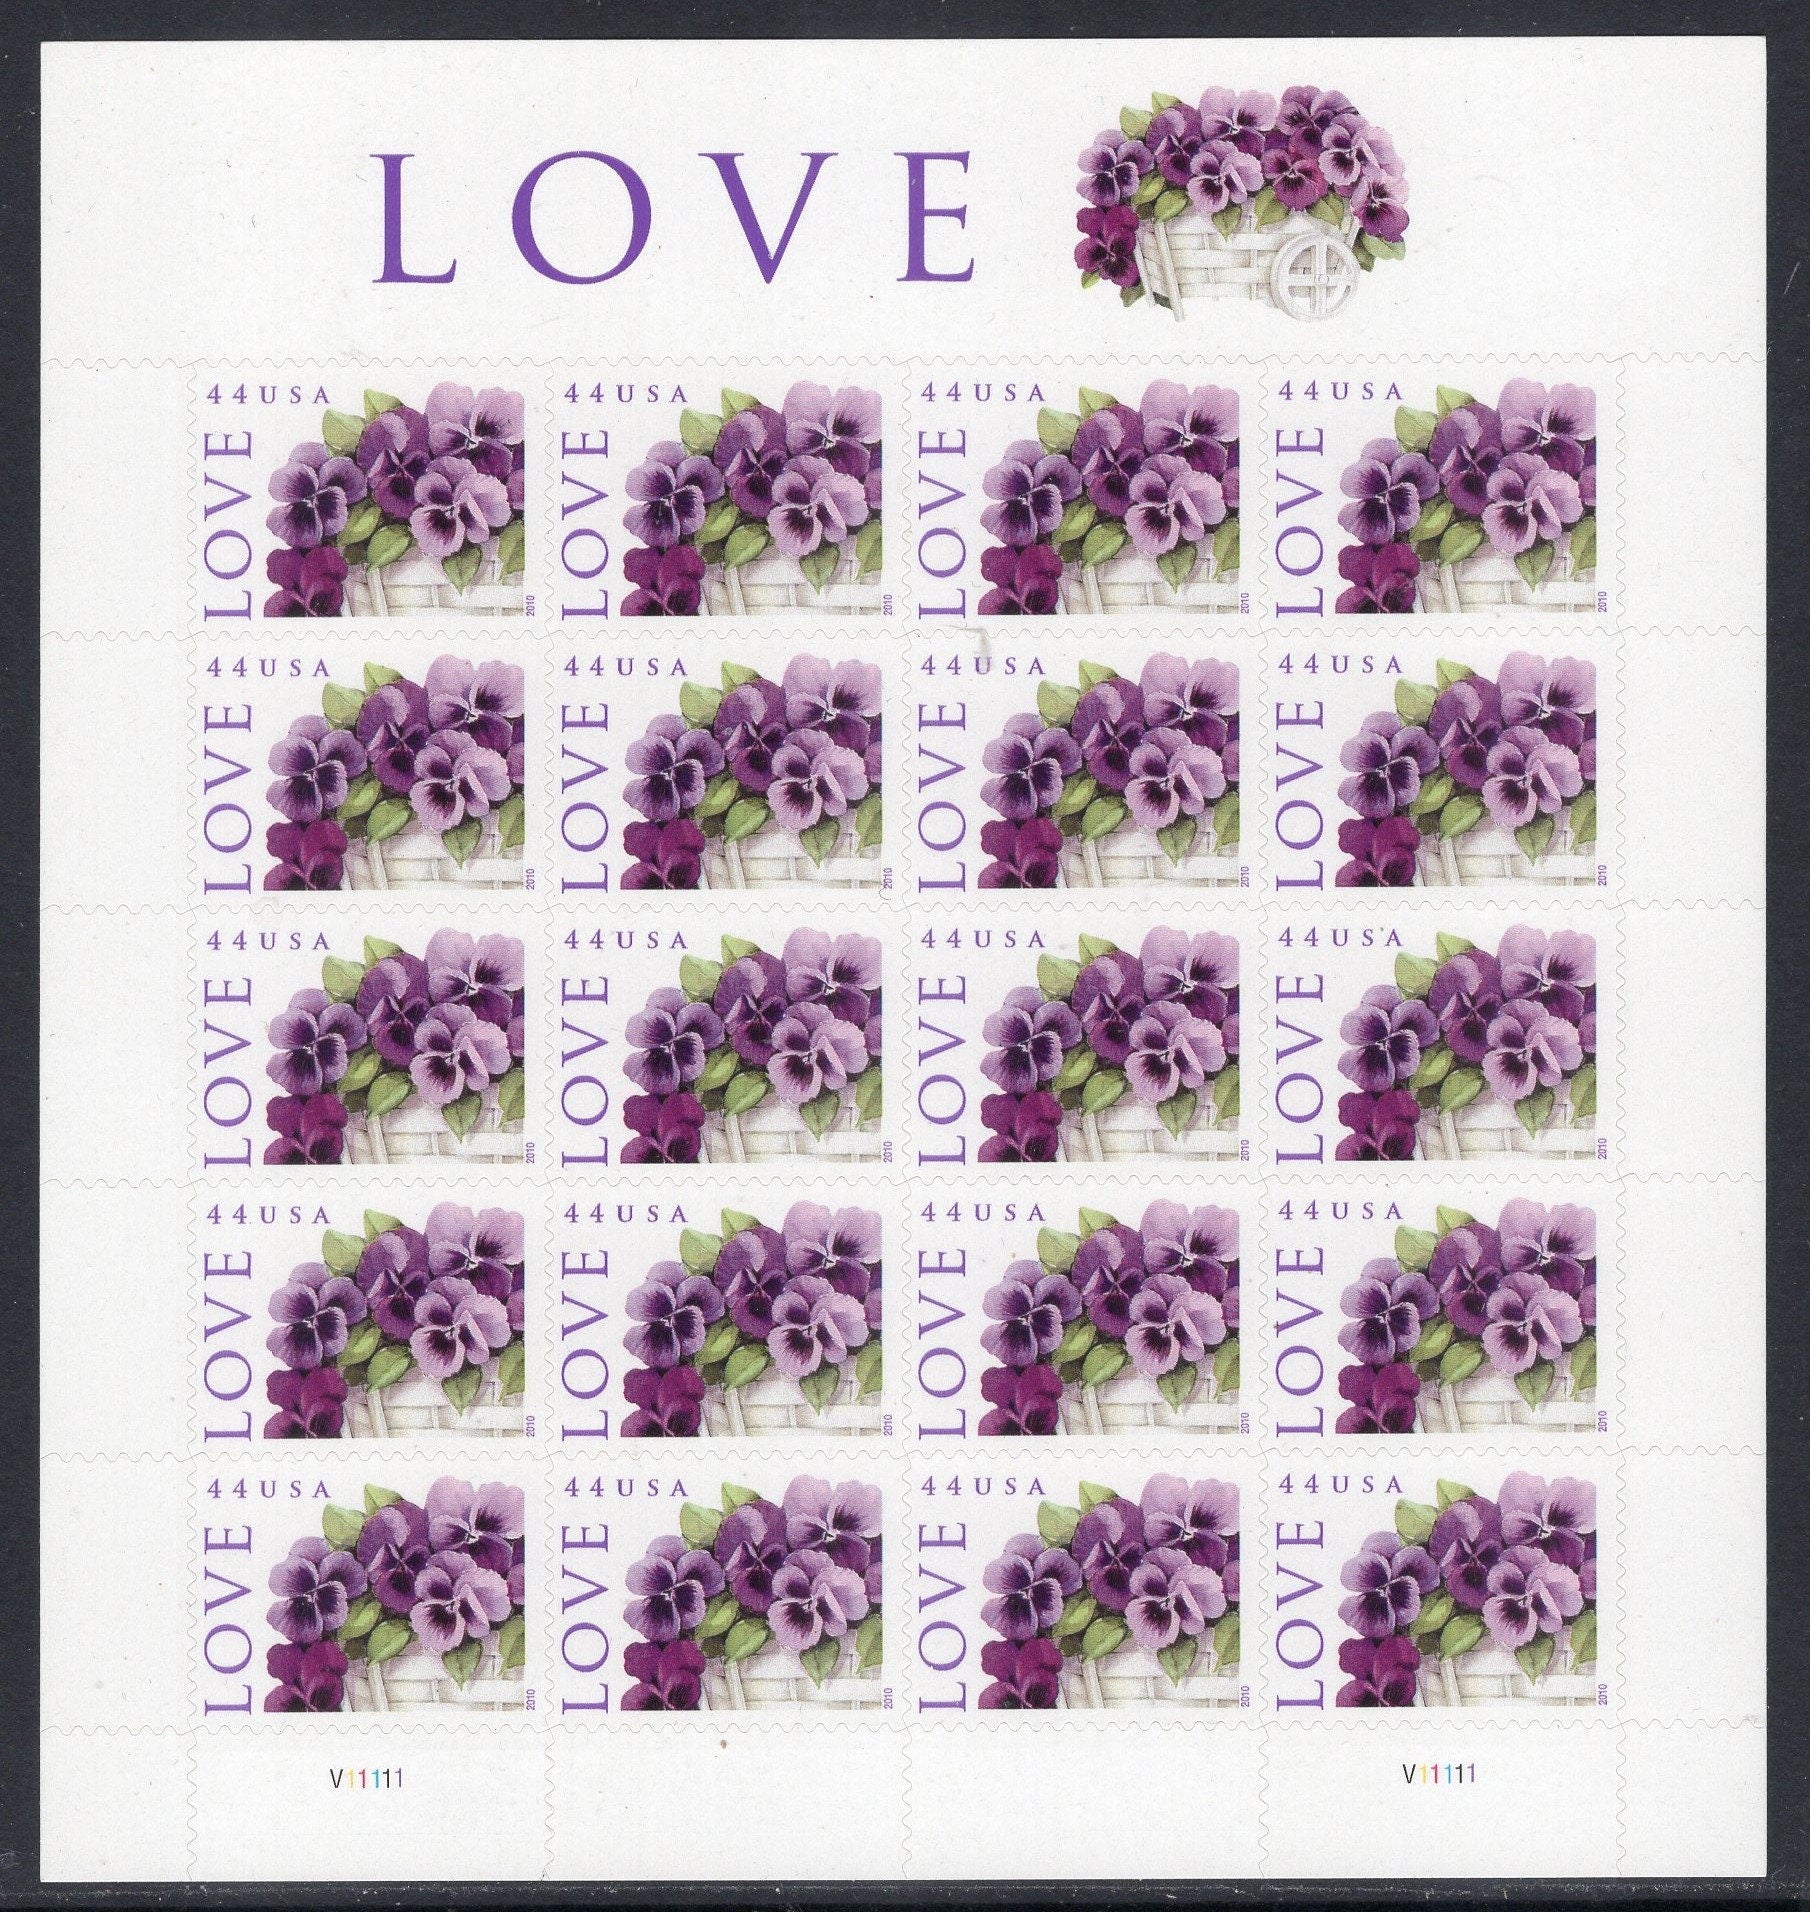 LOVE - PANSIES in a BASKET Pansy 44c Decorative Sheet of 20 -Great for Weddings Flowers Fresh Bright- Issued in 2010  - s4450-